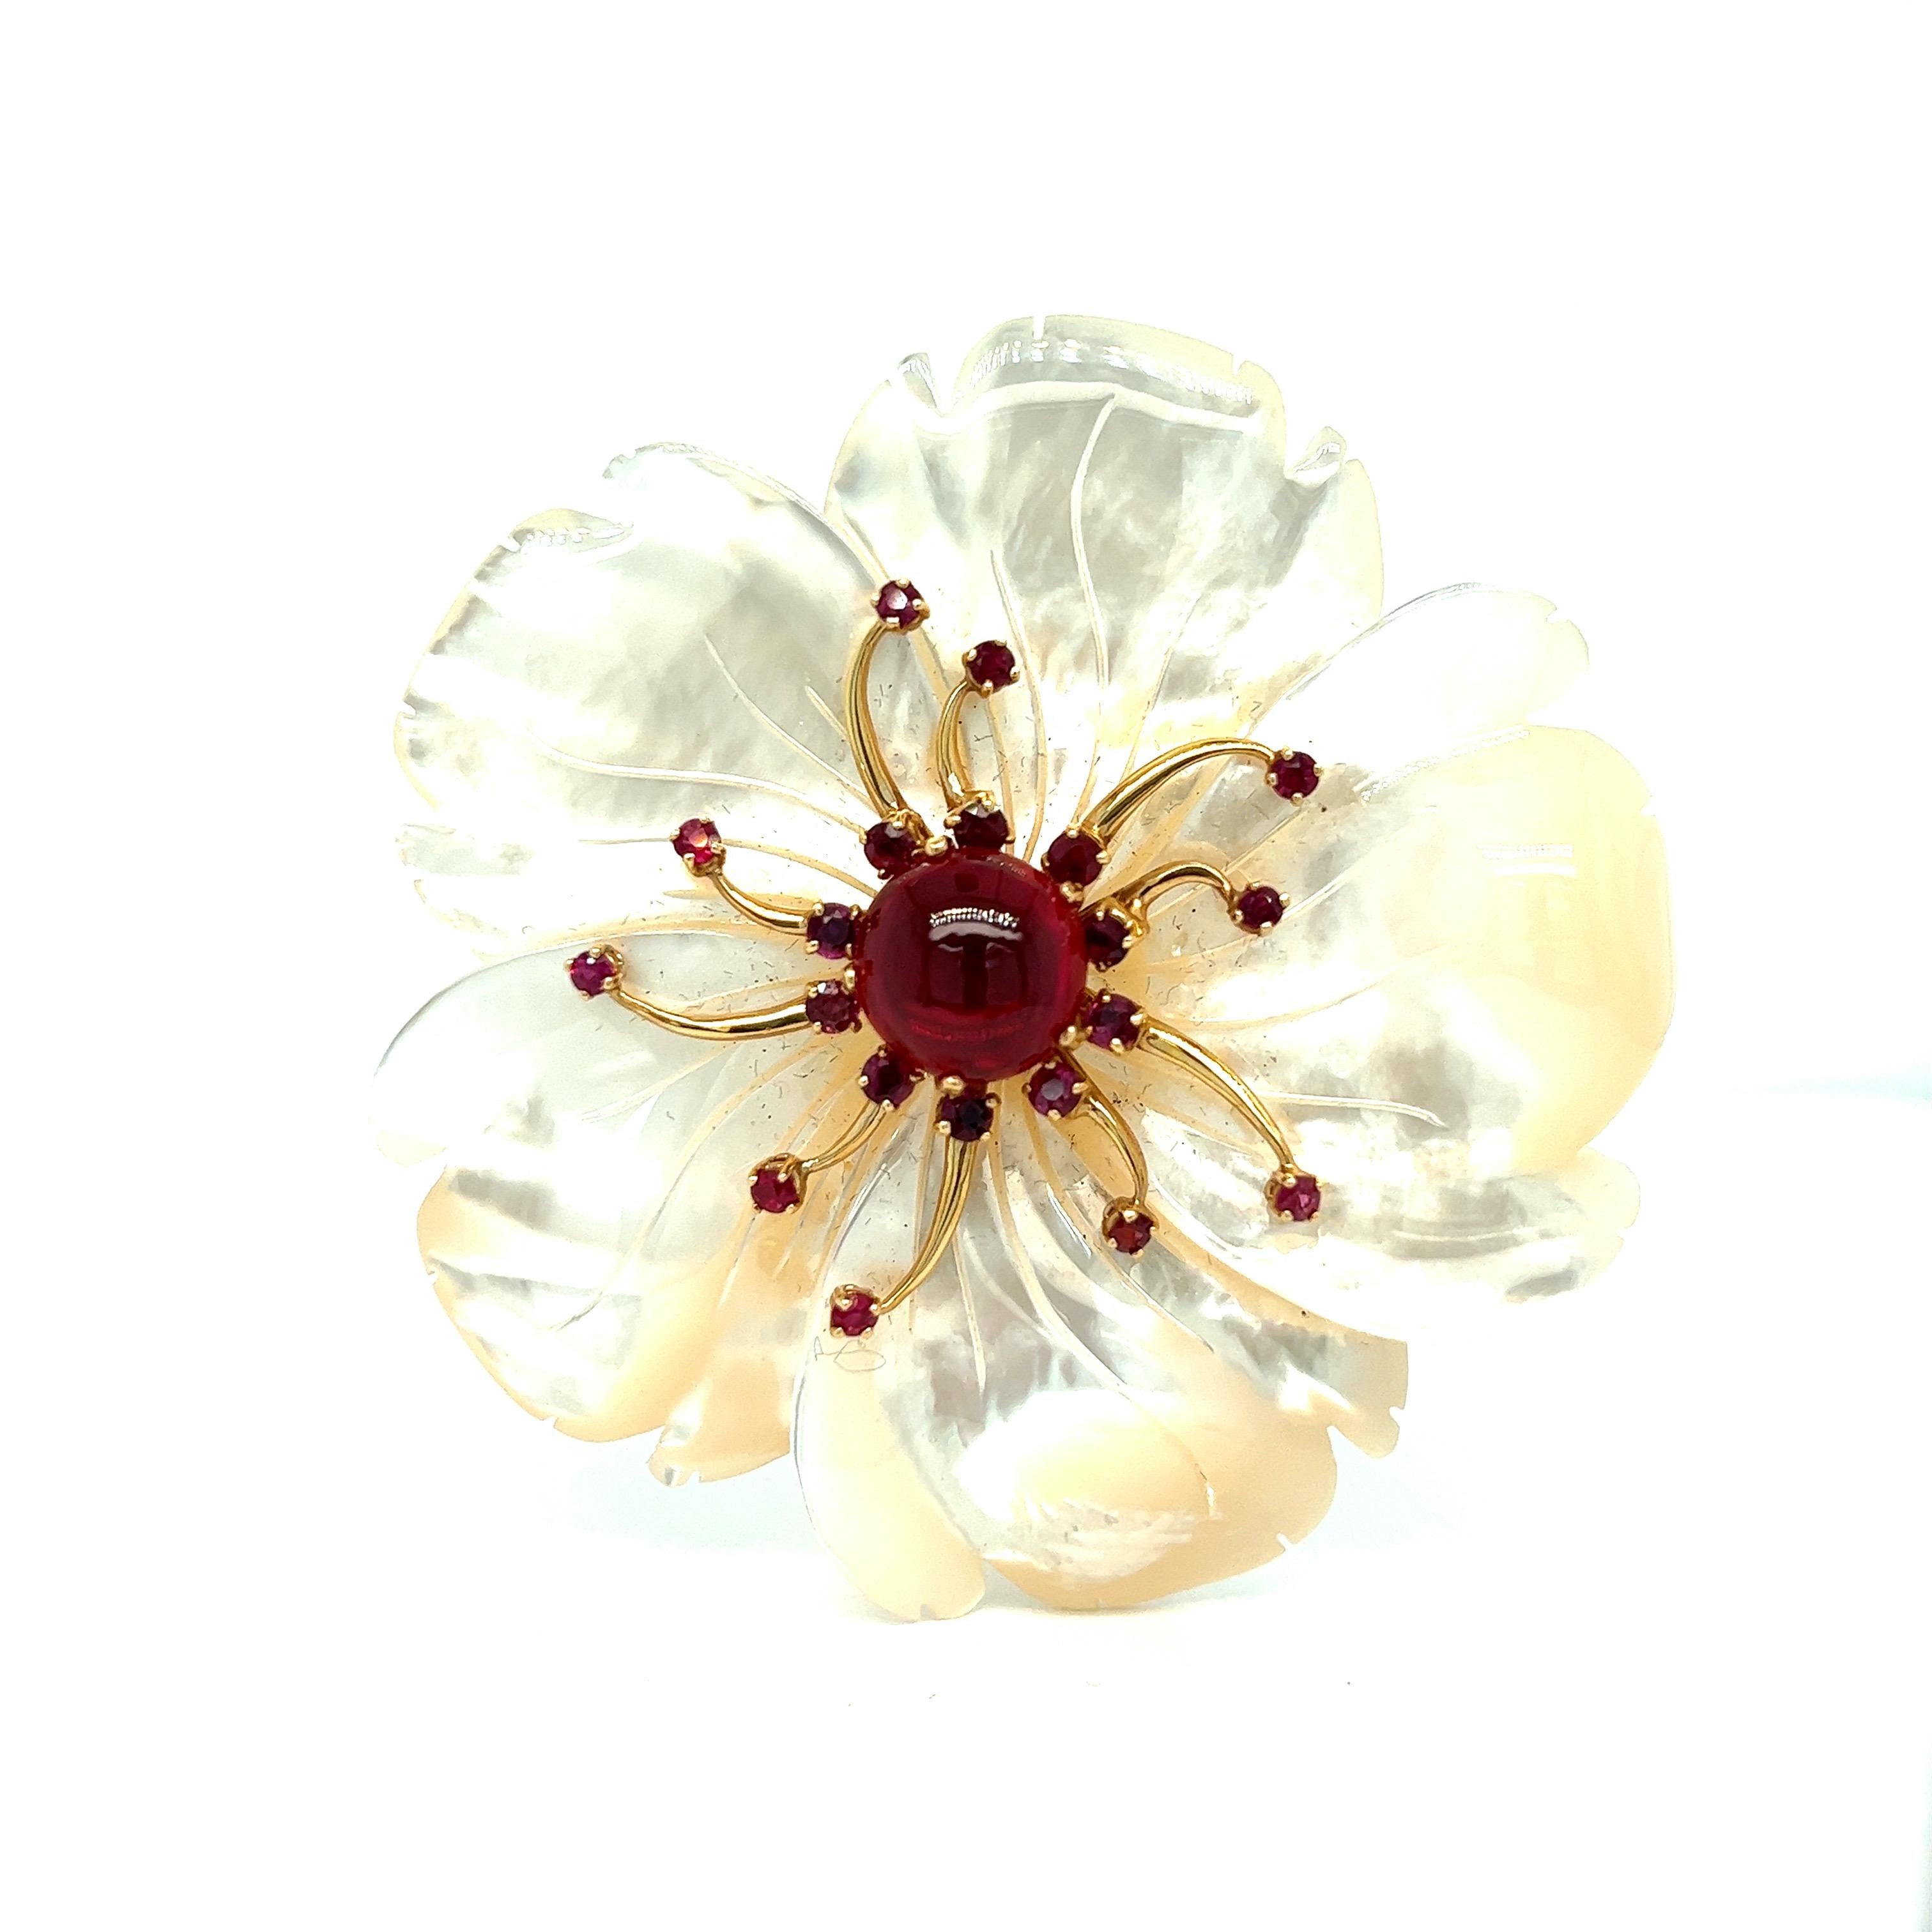 Mother of pearl garnet flower brooch

Center stone cabochon garnet (12 mm) of approximately 10-12 carats, mother of pearl petals, 18 karat yellow gold; marked 18K

Size: width 2.75 inches, length 2.75 inches
Total weight: 55.2 grams